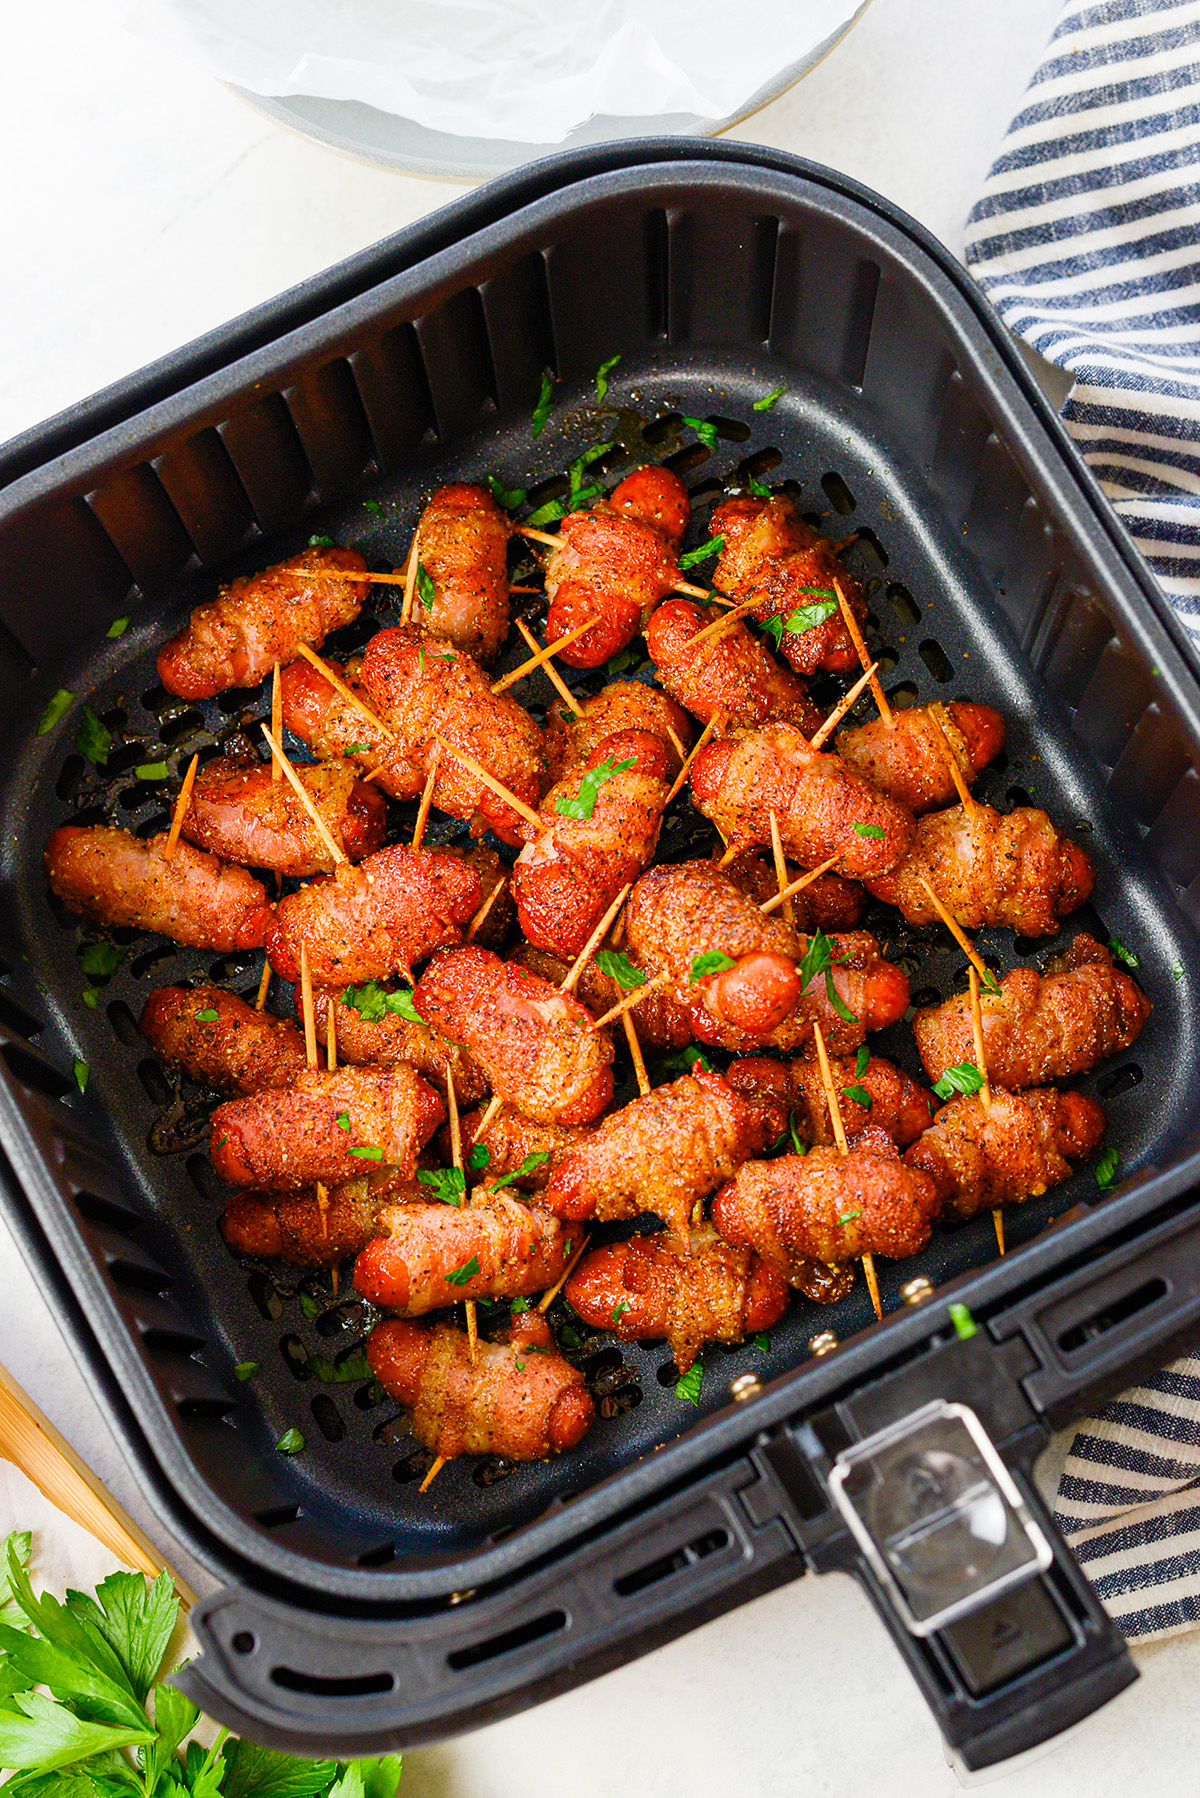 Overhead view of an air fryer basket full of bacon wrapped lil smokies.